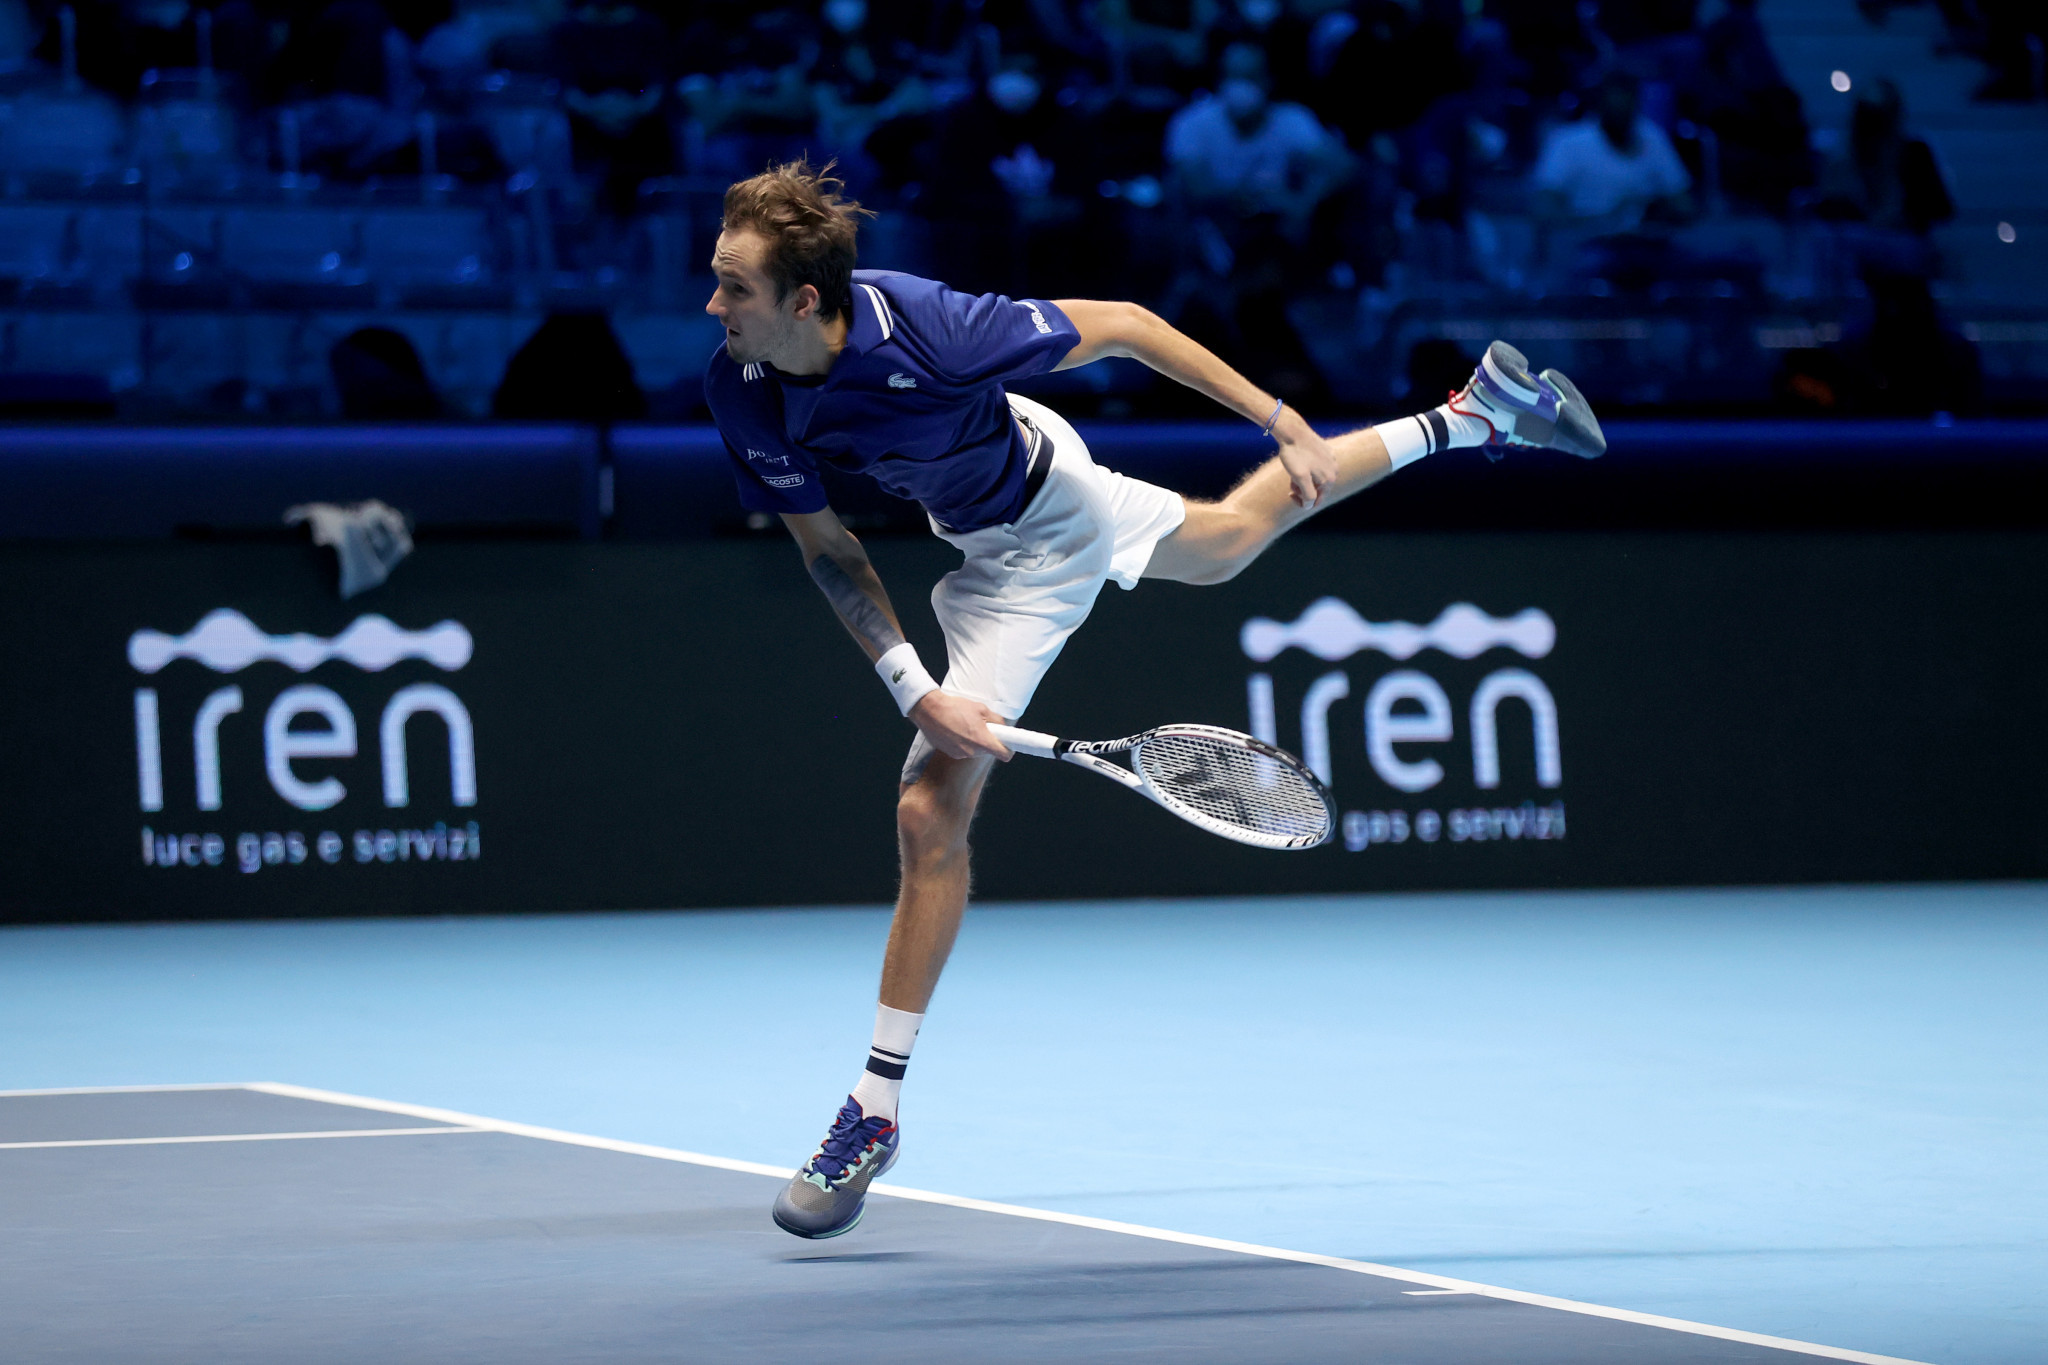 Daniil Medvedev is unbeaten at the ATP Finals so far ©Getty Images